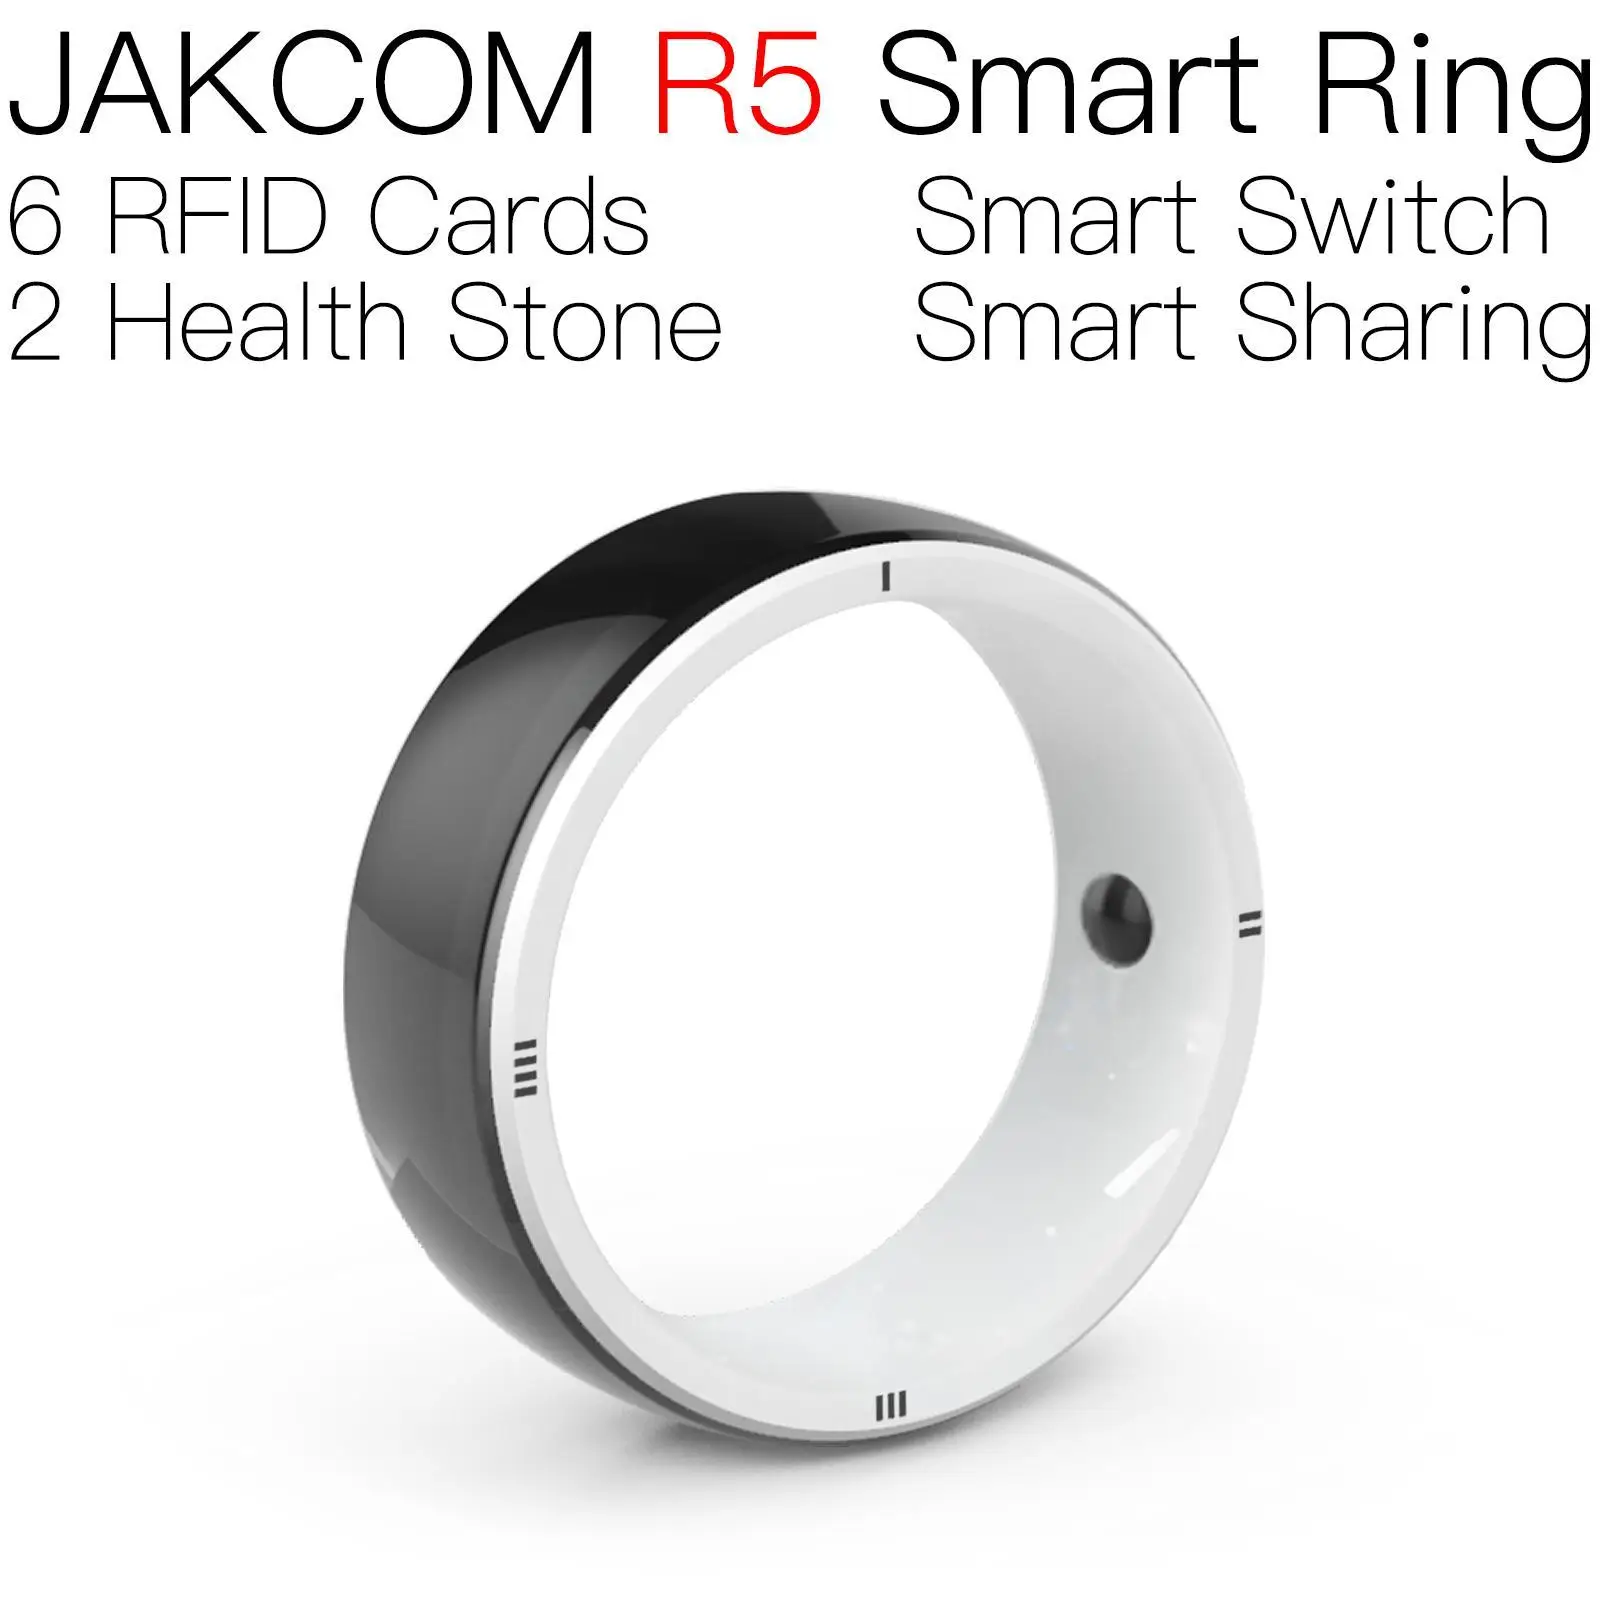 

JAKCOM R5 Smart Ring Nice than rfid card black for hotels with logo tags ties esl tag journal sublimation blanks kids